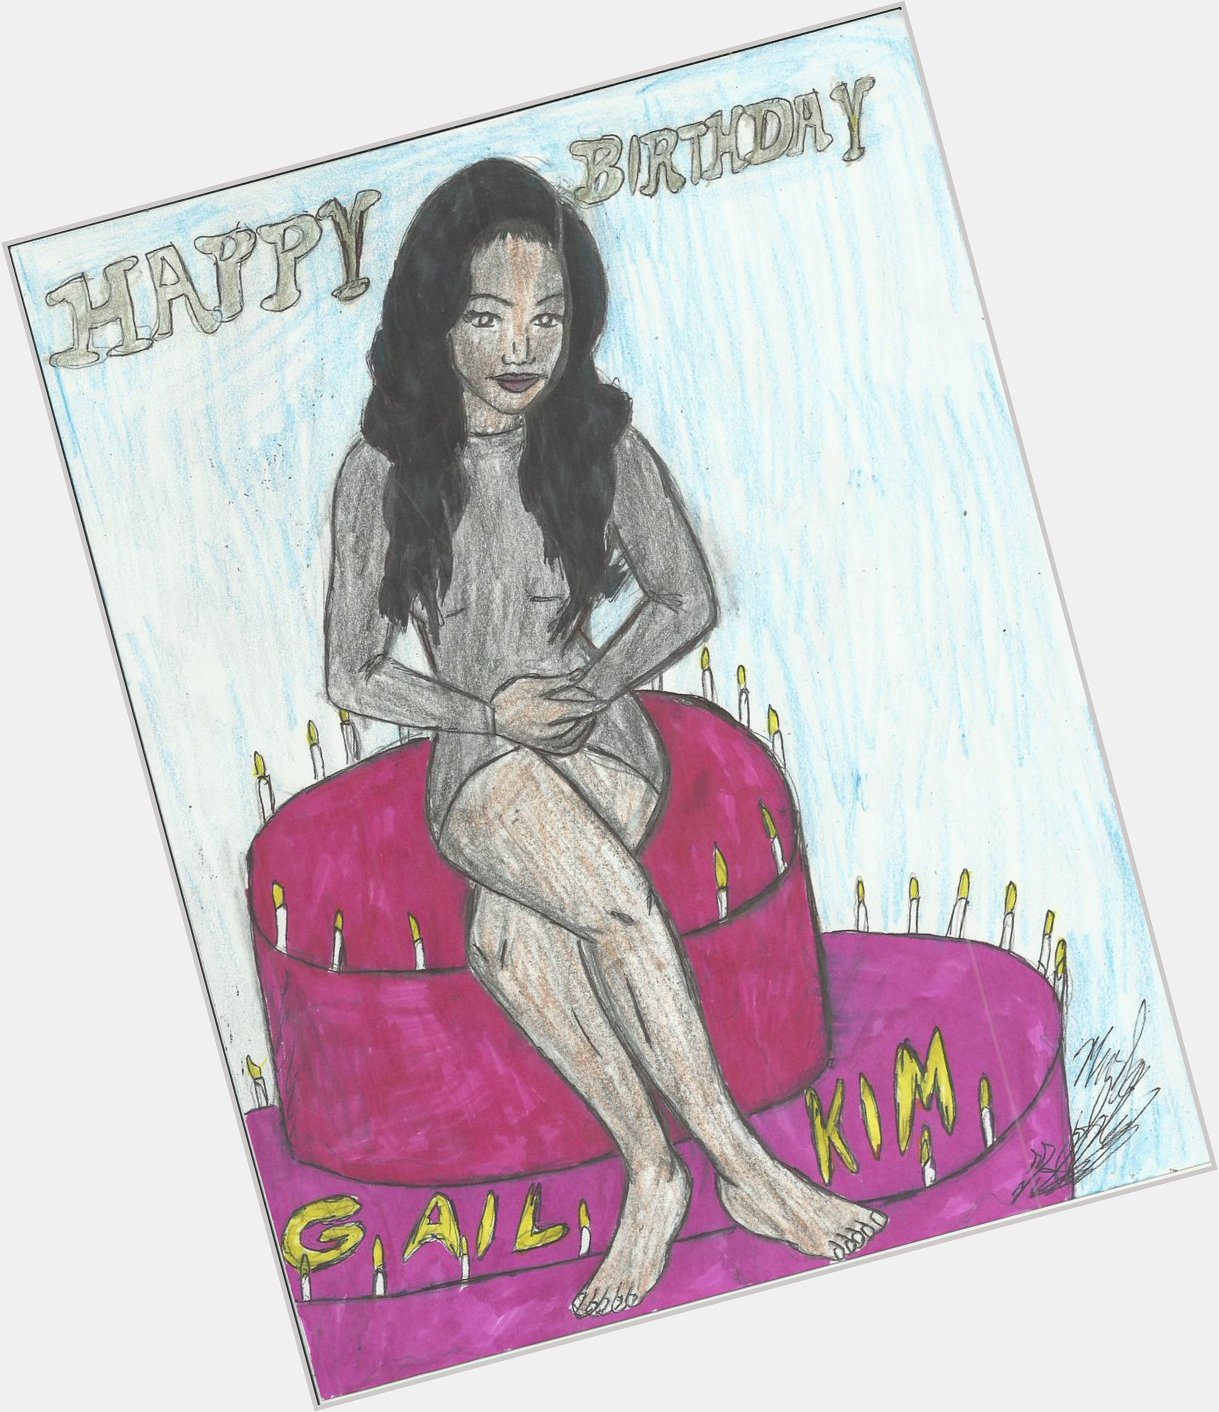 Happy Birthday Gail Kim!!!! Enjoy your special day. I hope you like the new 